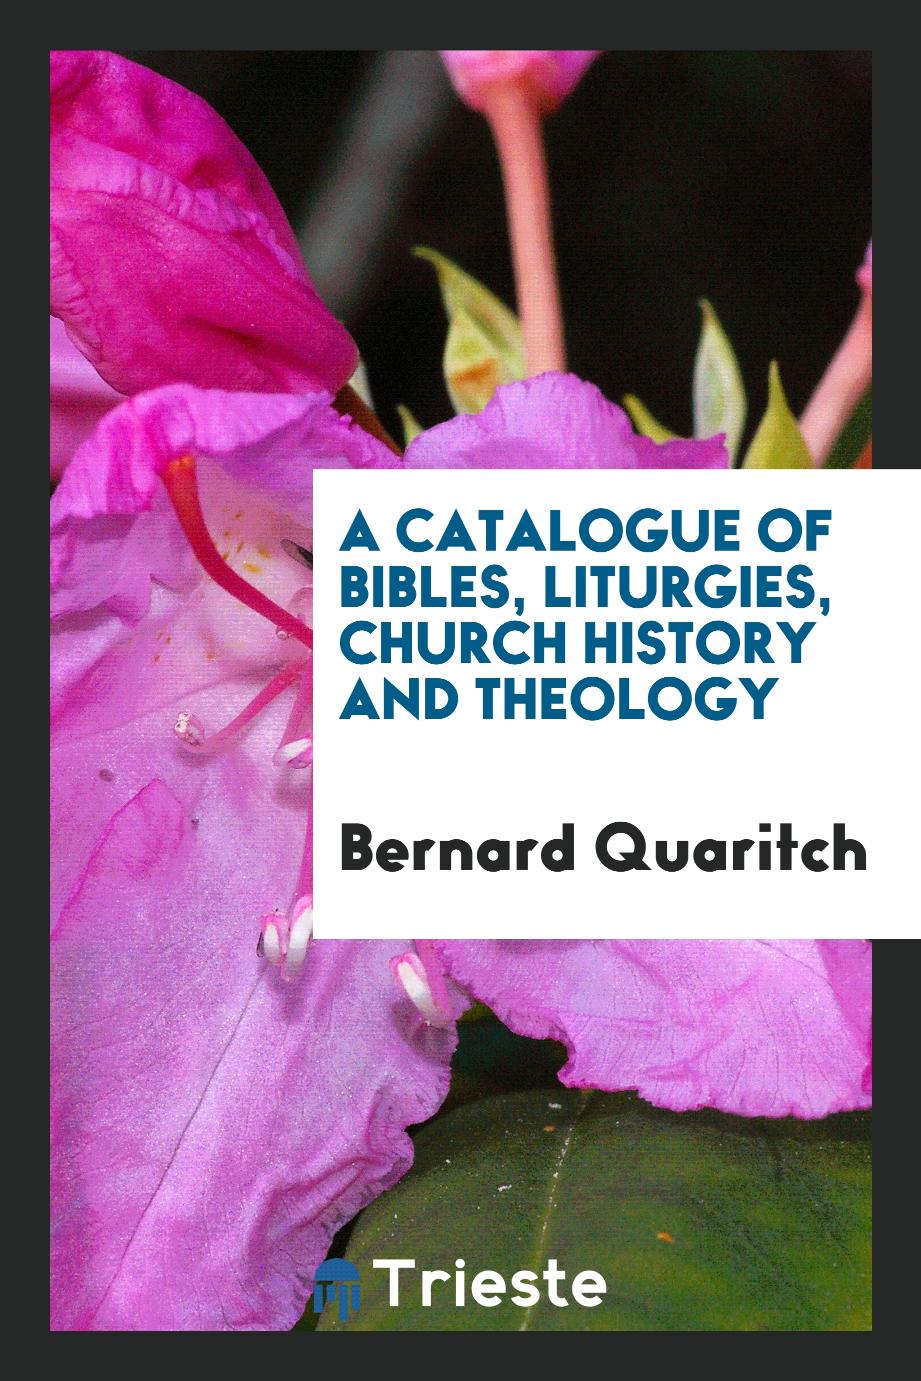 A Catalogue of Bibles, Liturgies, Church History and Theology